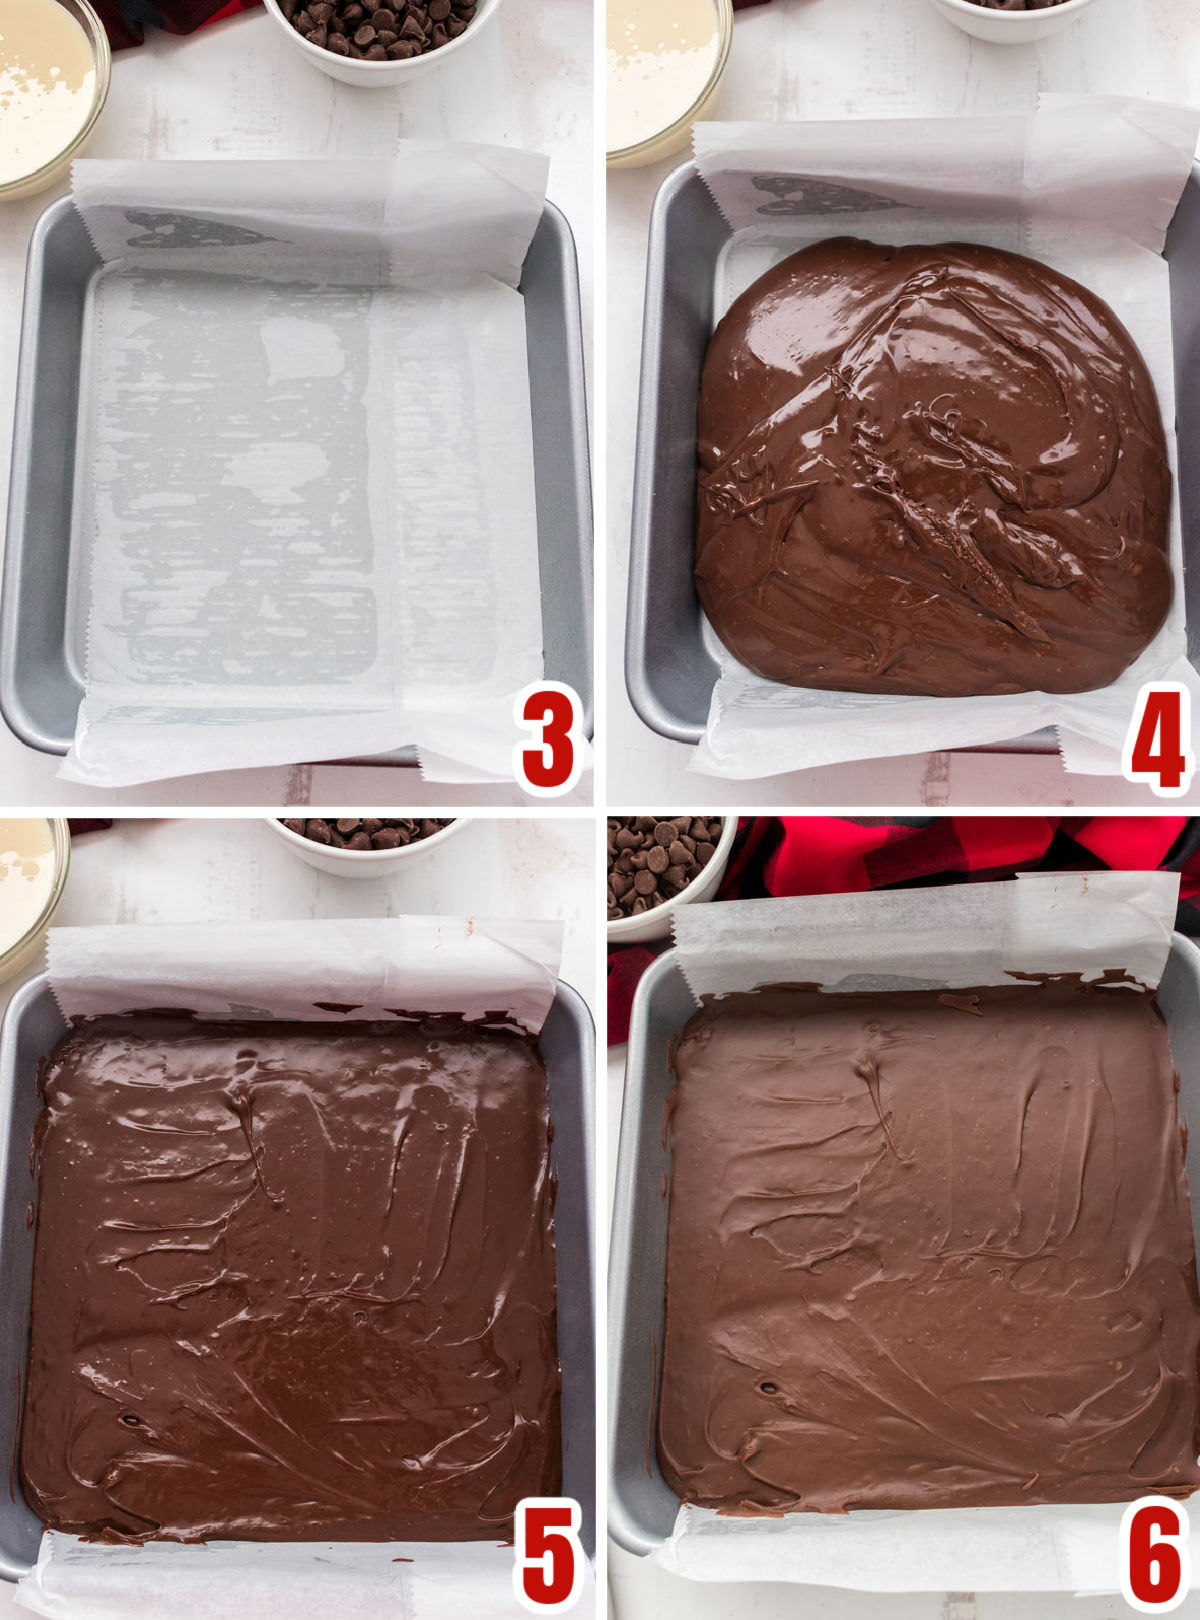 Collage image showing the steps for pouring the fudge mixture into an 8x8" baking pan.